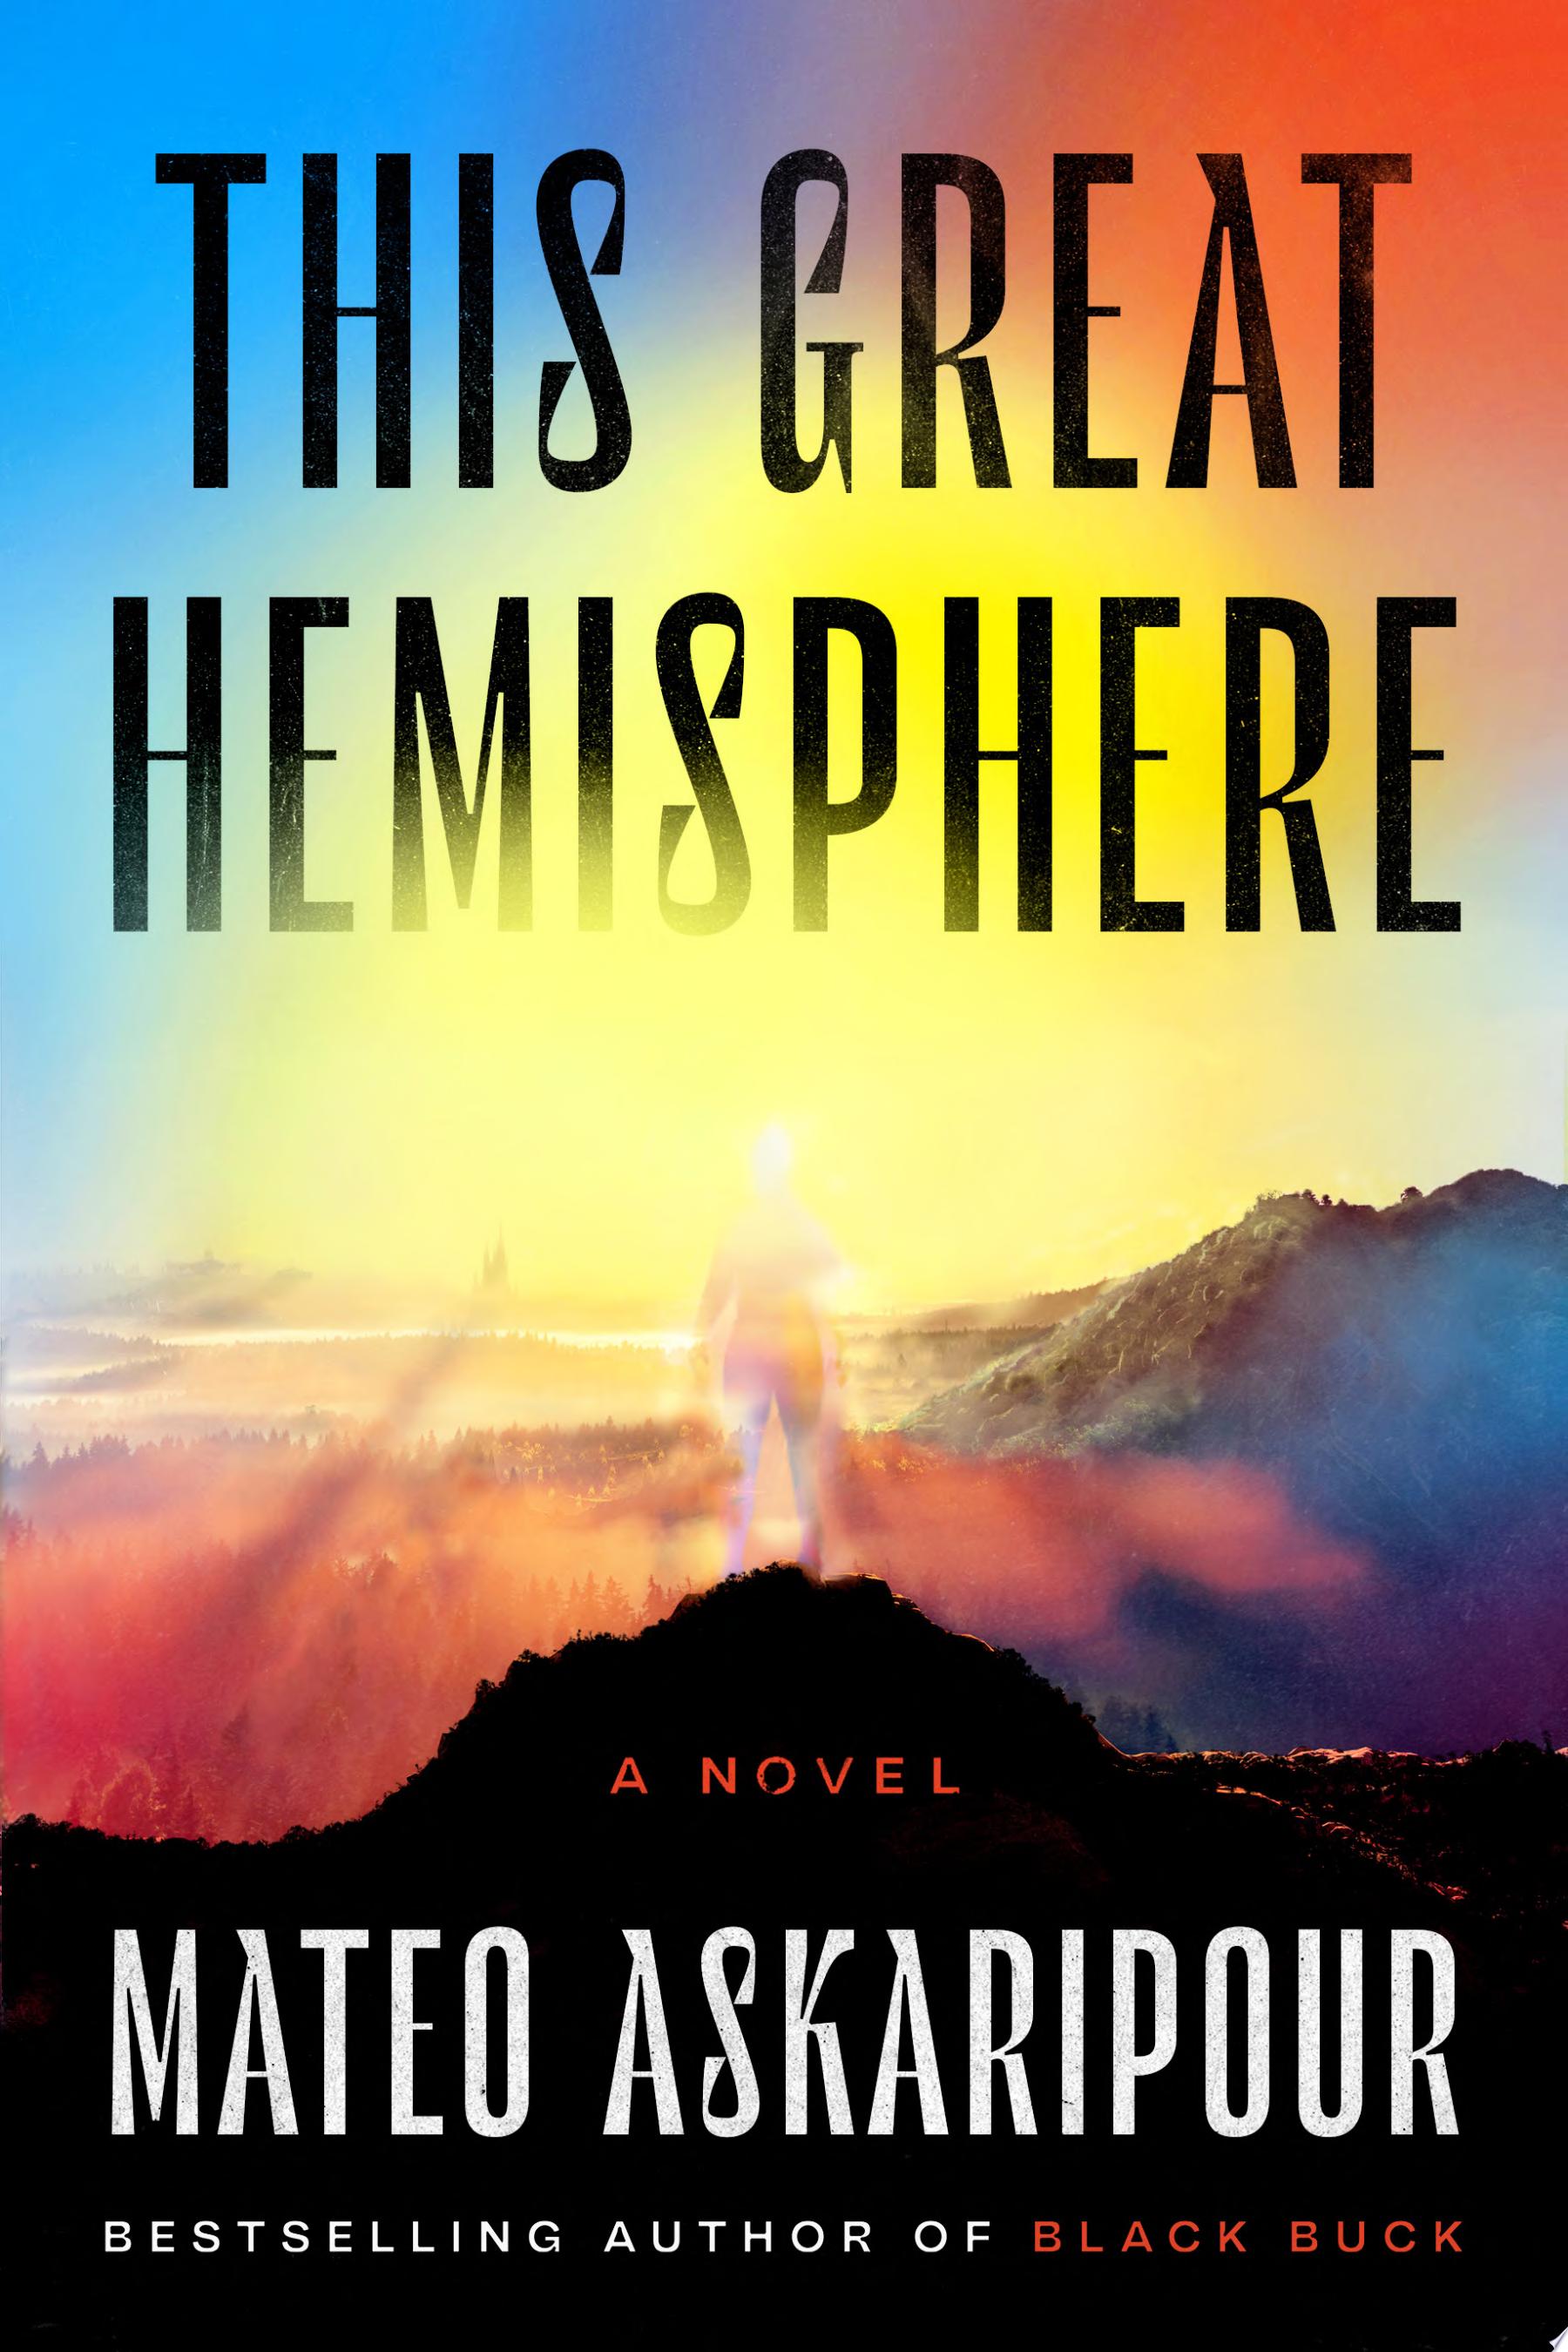 Image for "This Great Hemisphere"